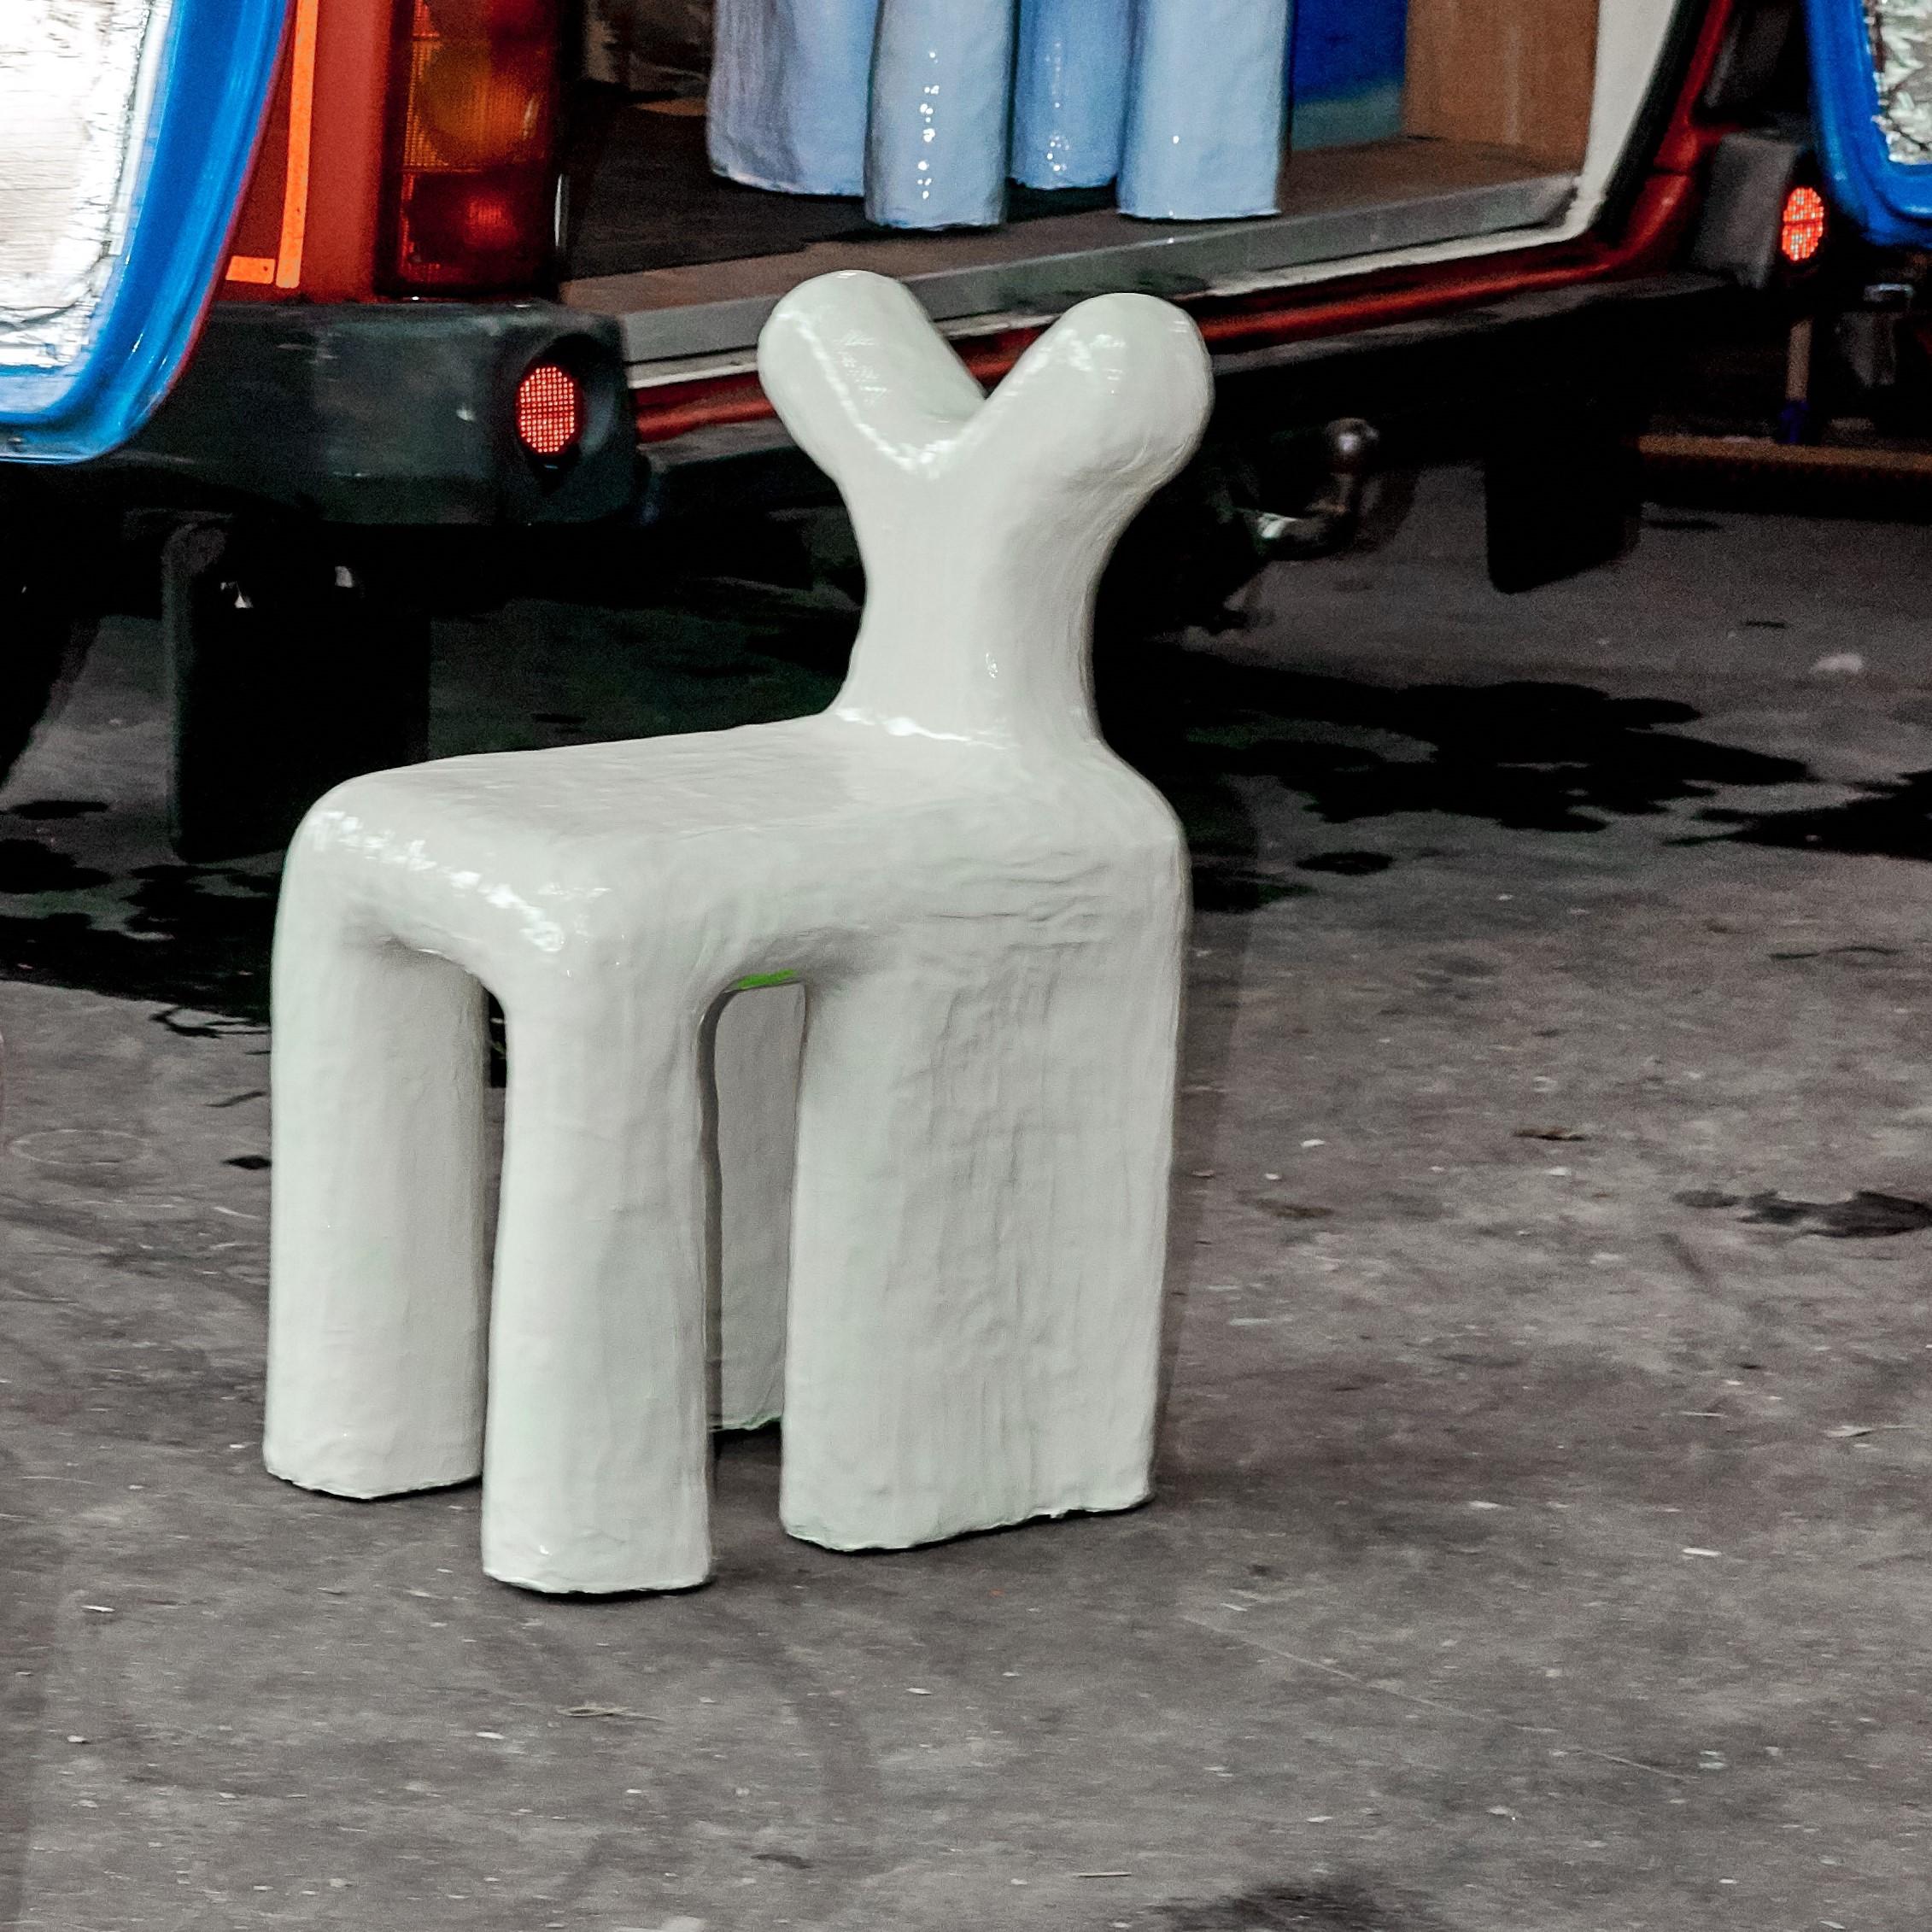 Contemporary Funky Stool Made in 467 Minutes by Minute Manufacturing